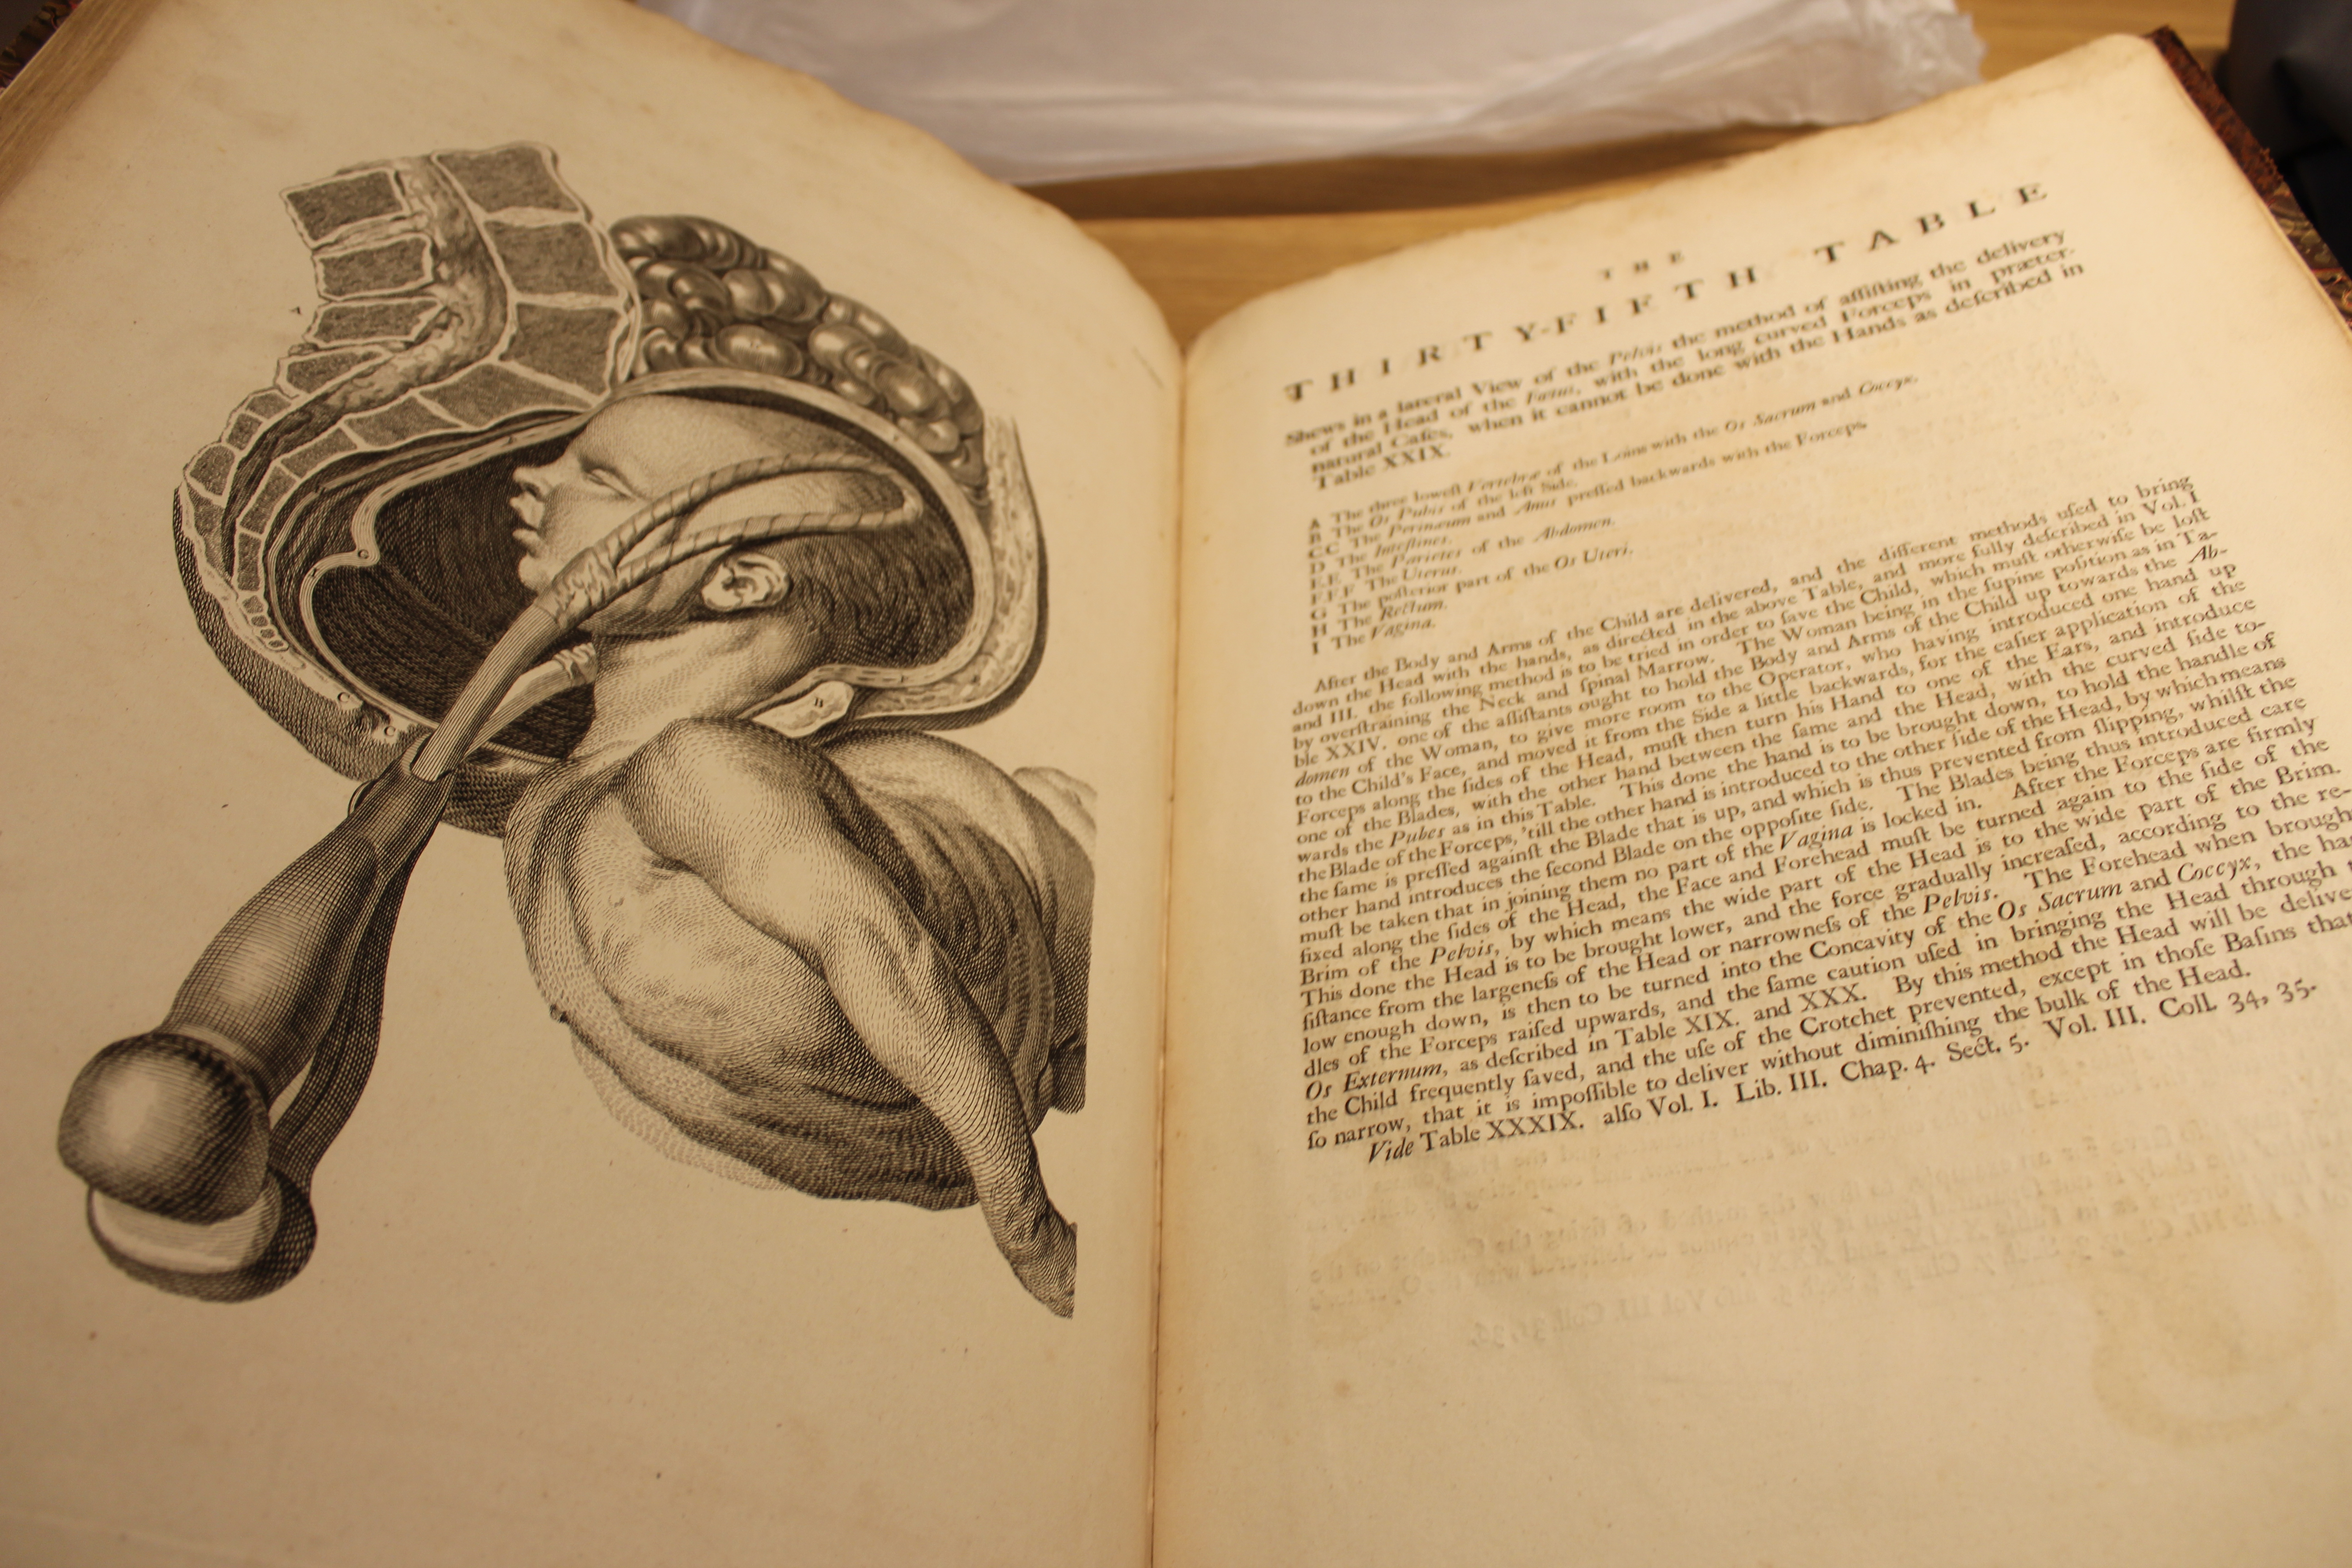 William Smellie, 'A sett of anatomical tables, with explanations, and an abridgement, of the practice of midwifery: with a view to illustrate a treatise on that subject, and collection of cases'. London, 1754